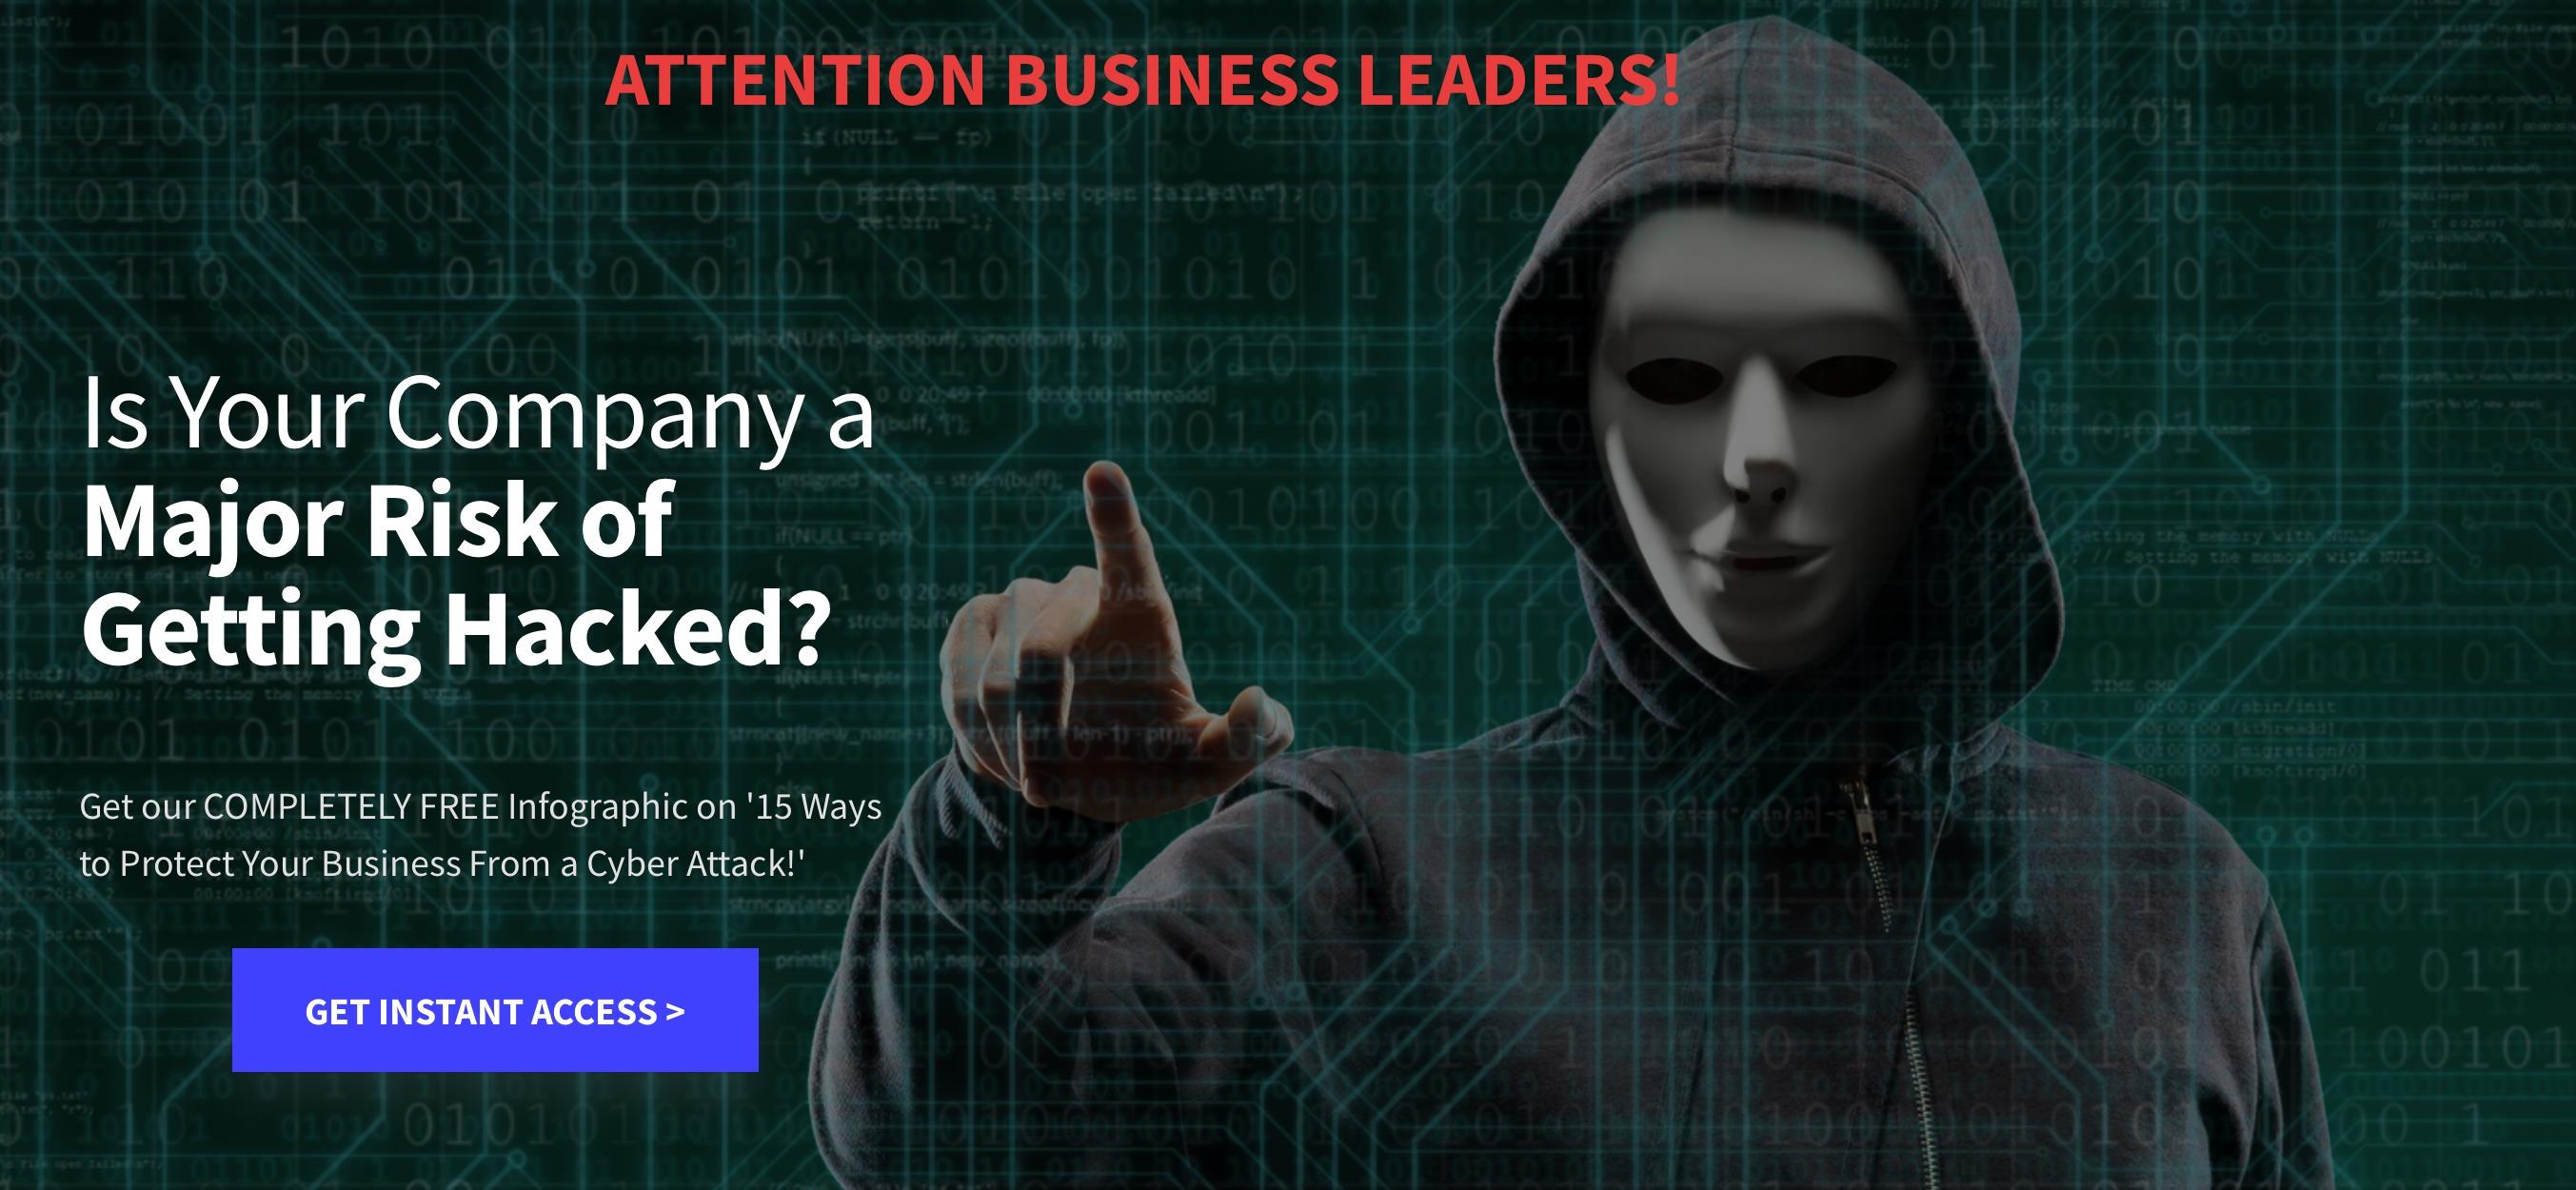 Calling All Business Leaders! 15 Ways to Protect Your Business.